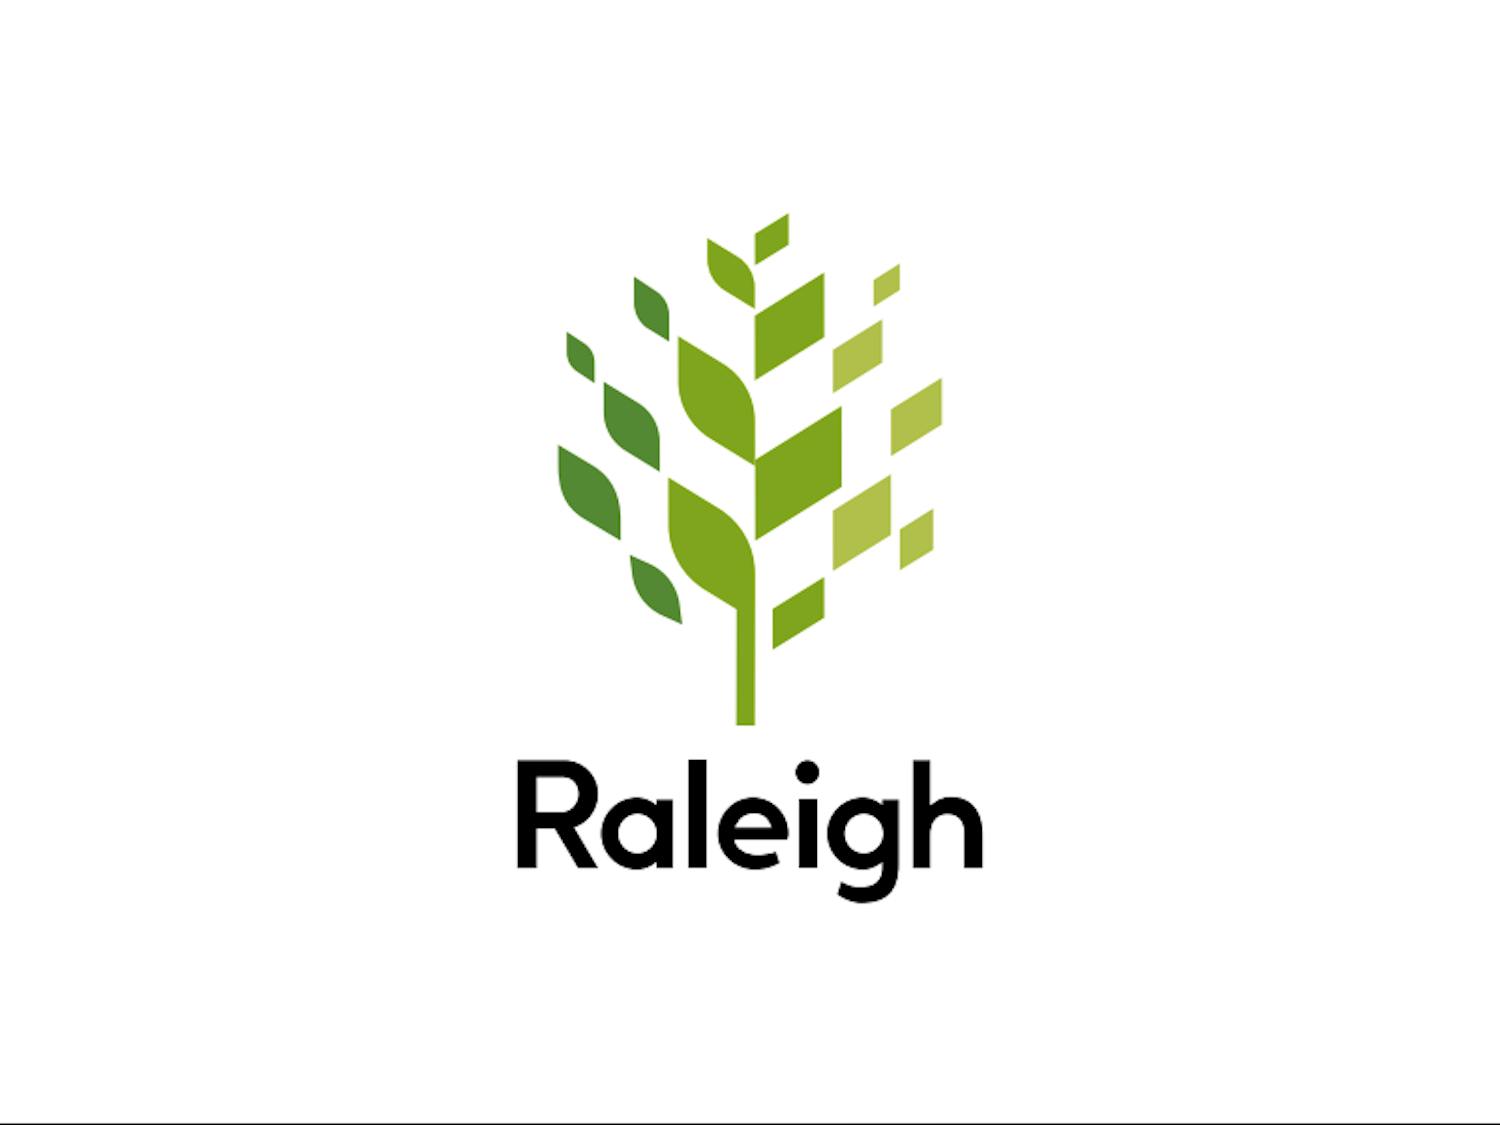 Raleigh invested over $200,000 in the design of a new logo to unify the city’s brand image.